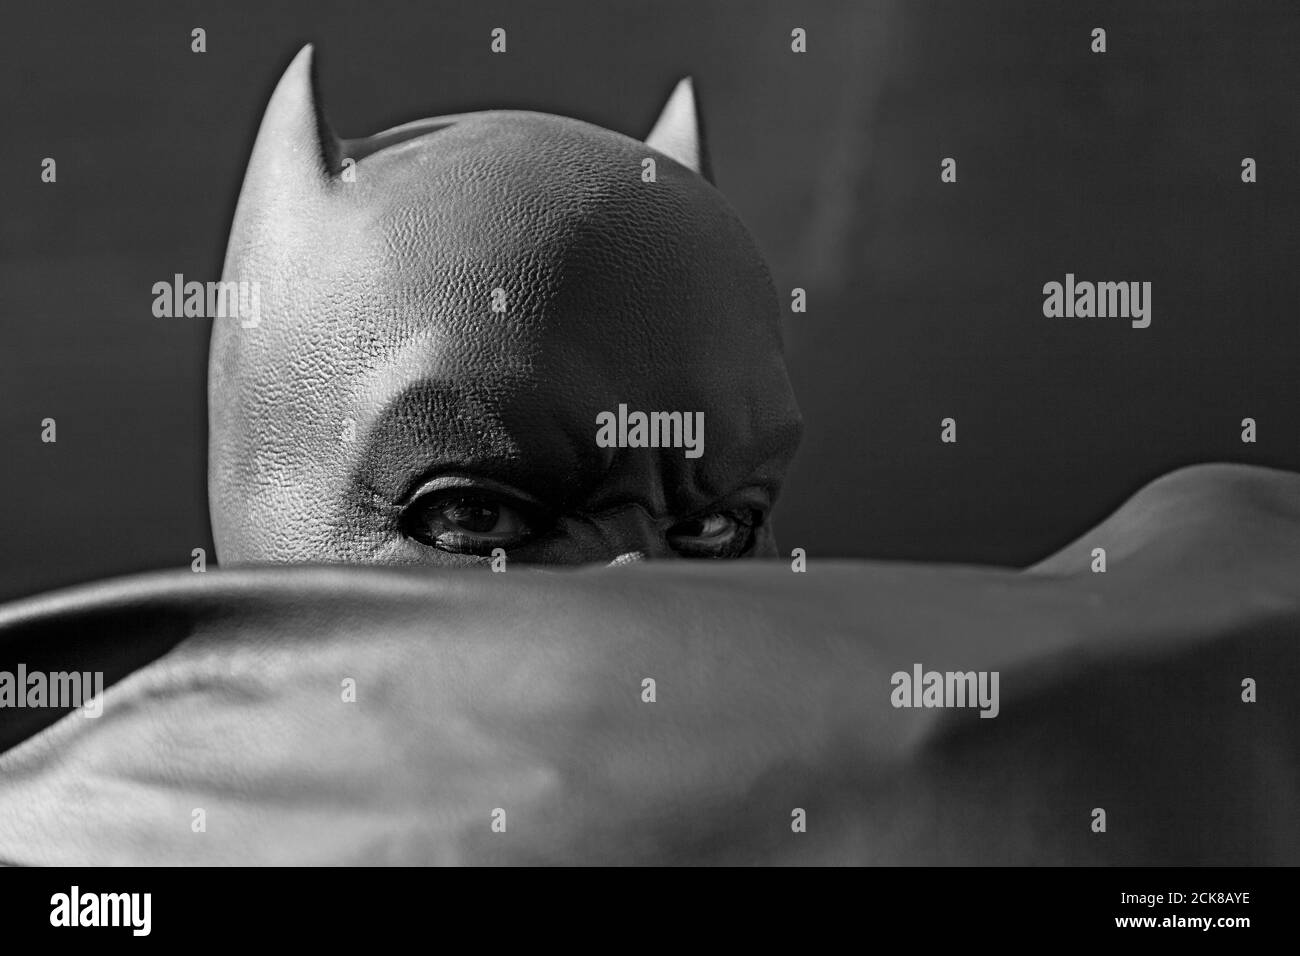 Umea, Norrland Sweden - September 5, 2020: Batman hides parts of his face in his cloak Stock Photo